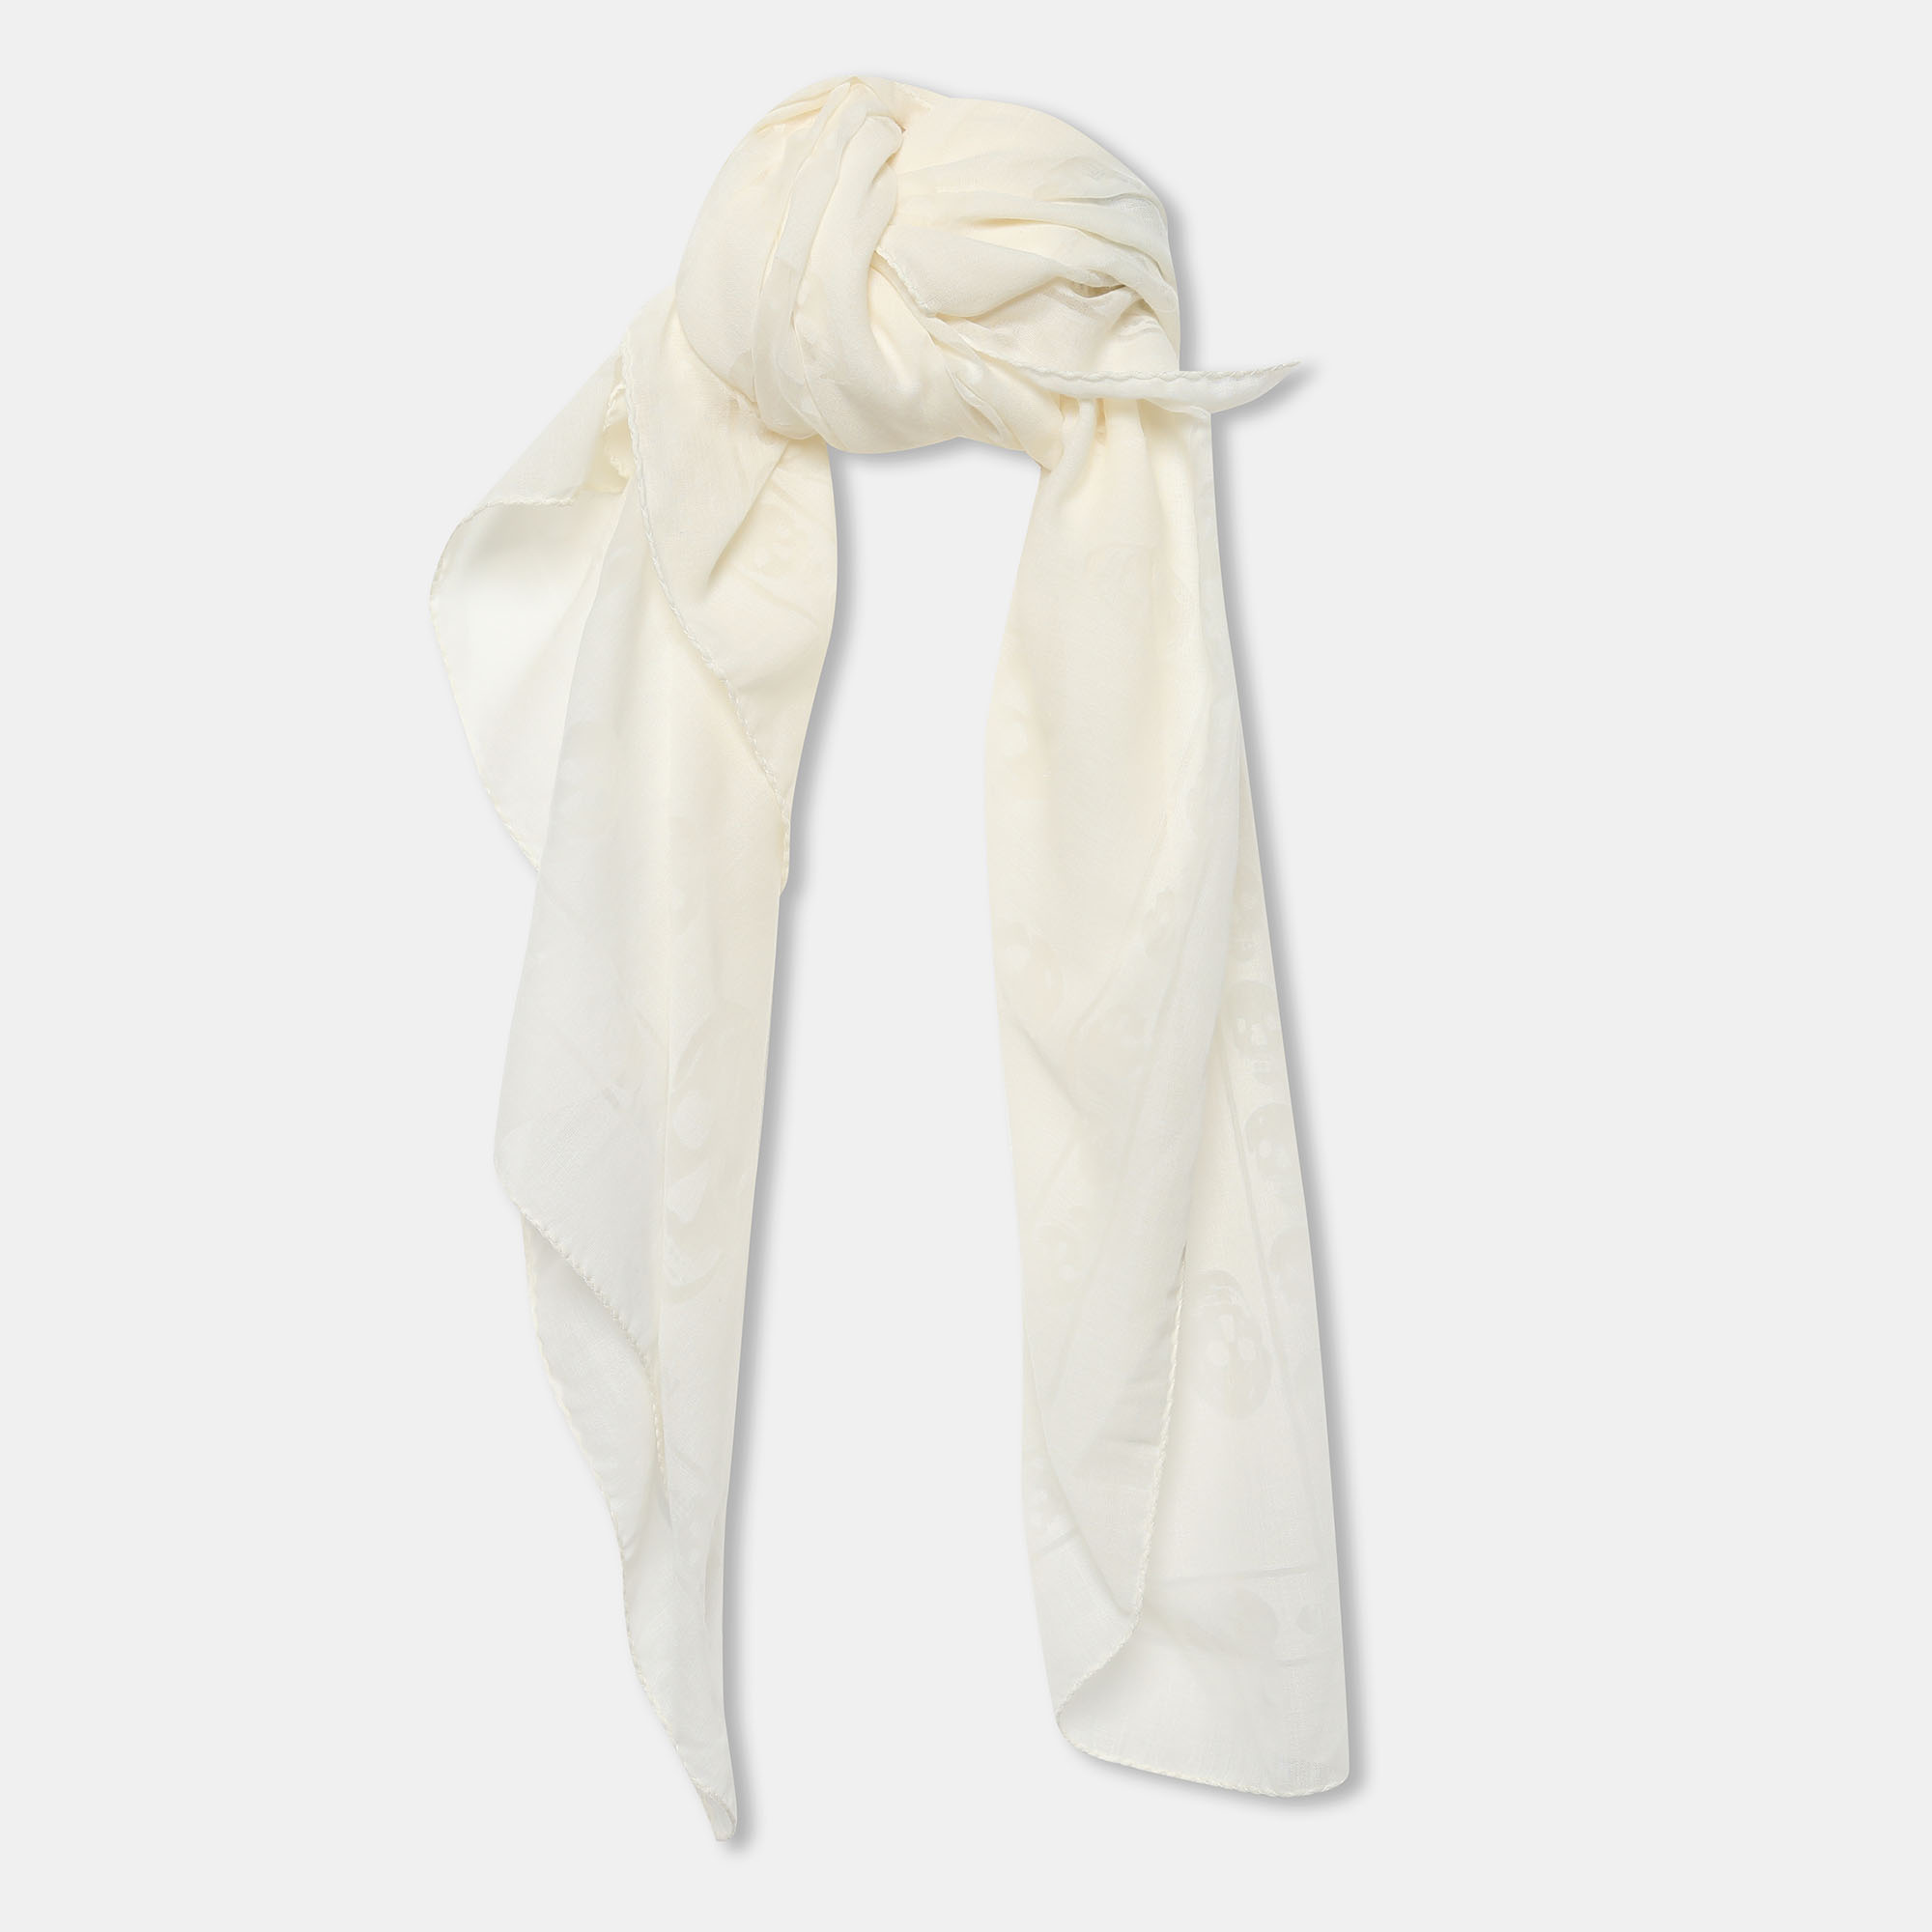 

Alexander McQueen Ivory Skull Patterned Cotton Scarf, White